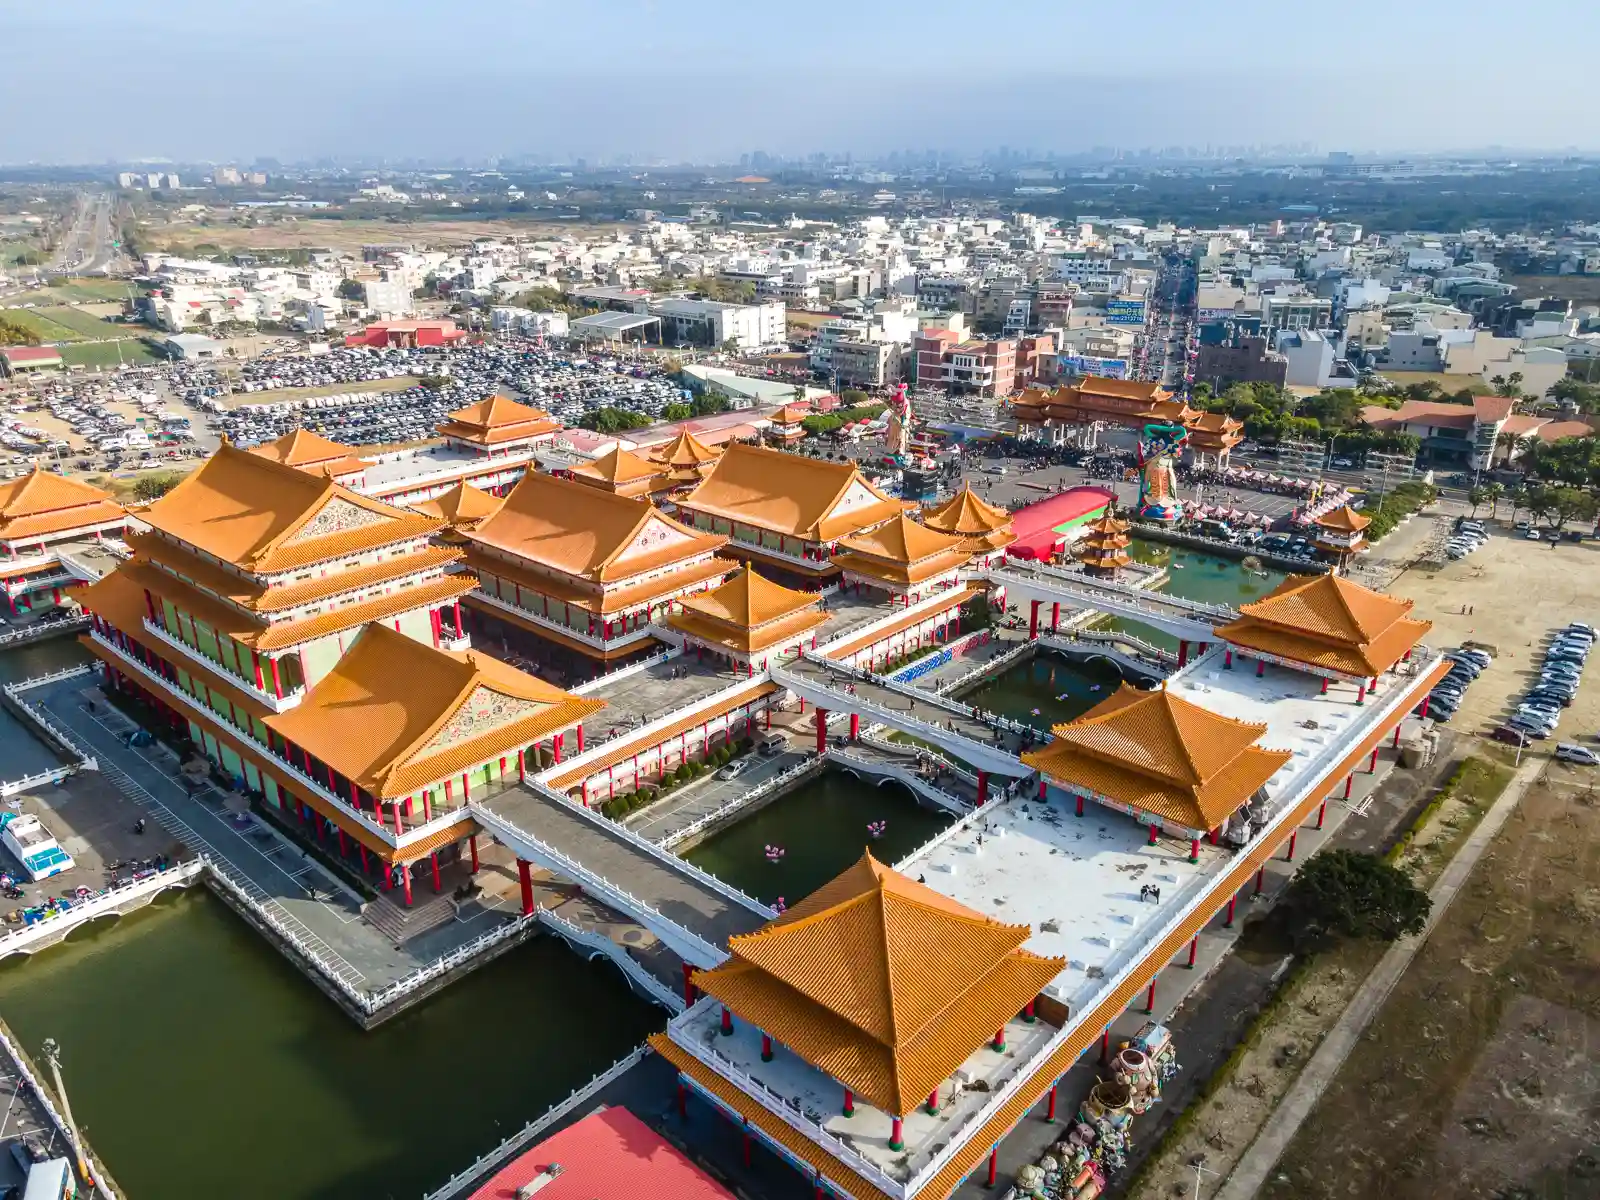 Luerman Mazu Temple seen from above during the day.